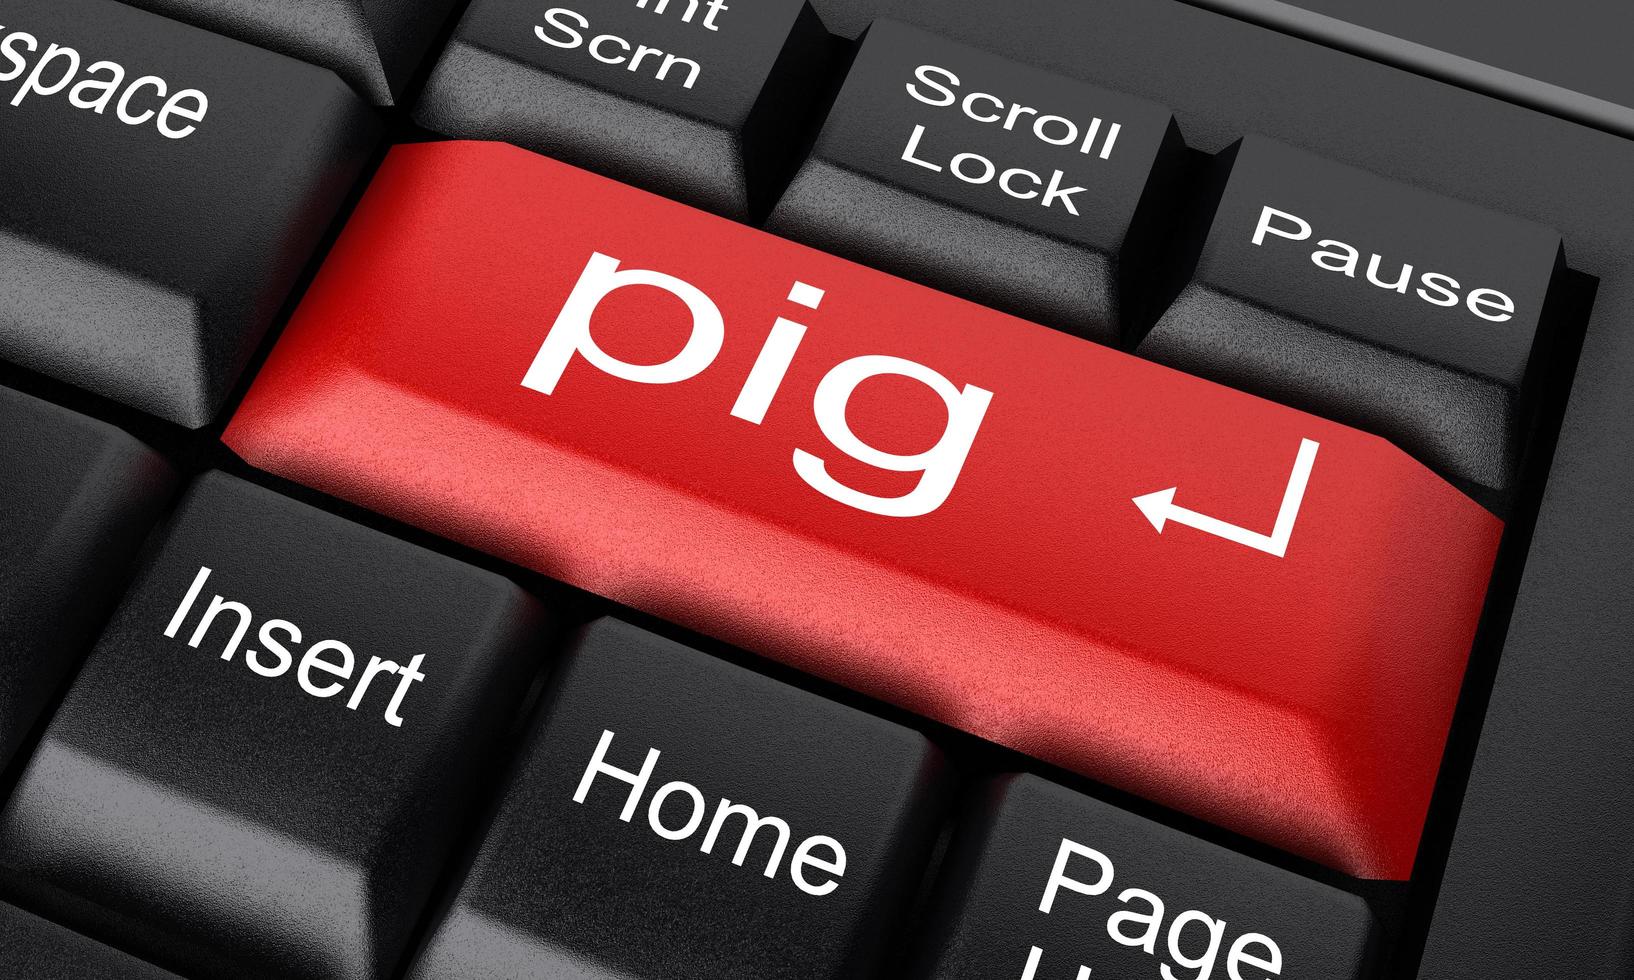 pig word on red keyboard button photo